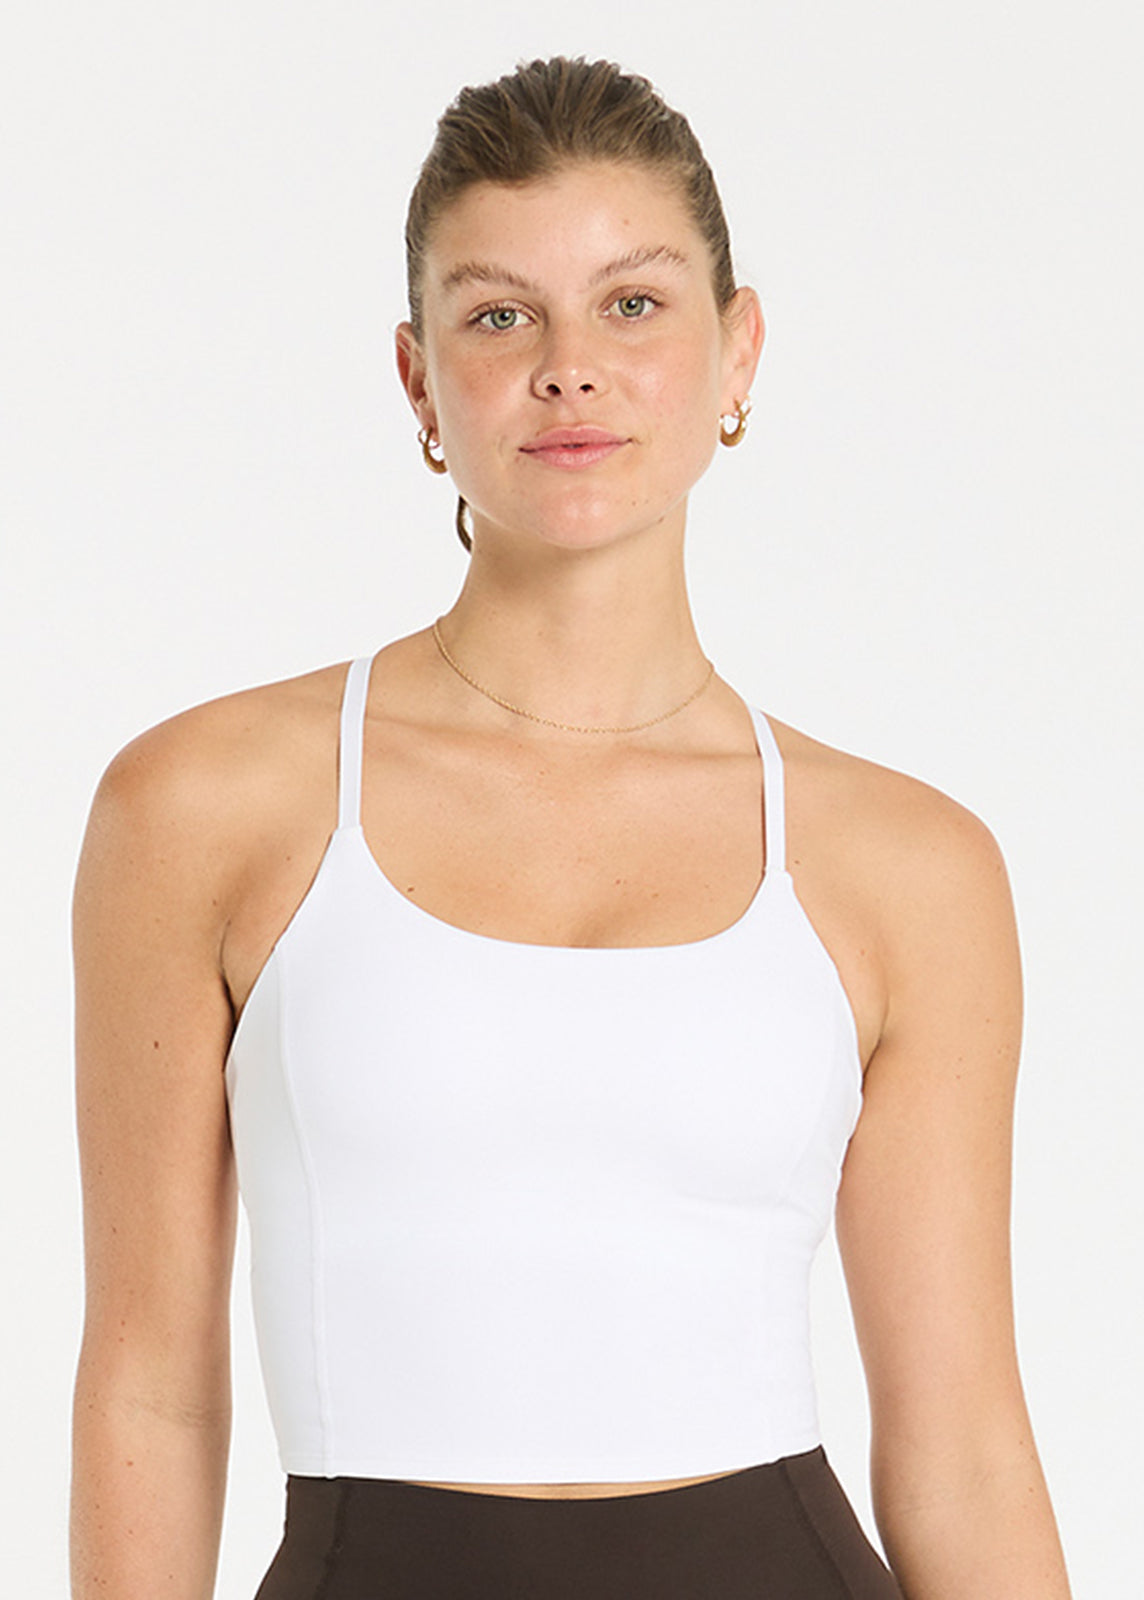 Sold Out! The Strong Athletic Woman Drop Arm Muscle Tank Black with Silver  Ink for Female Athletes